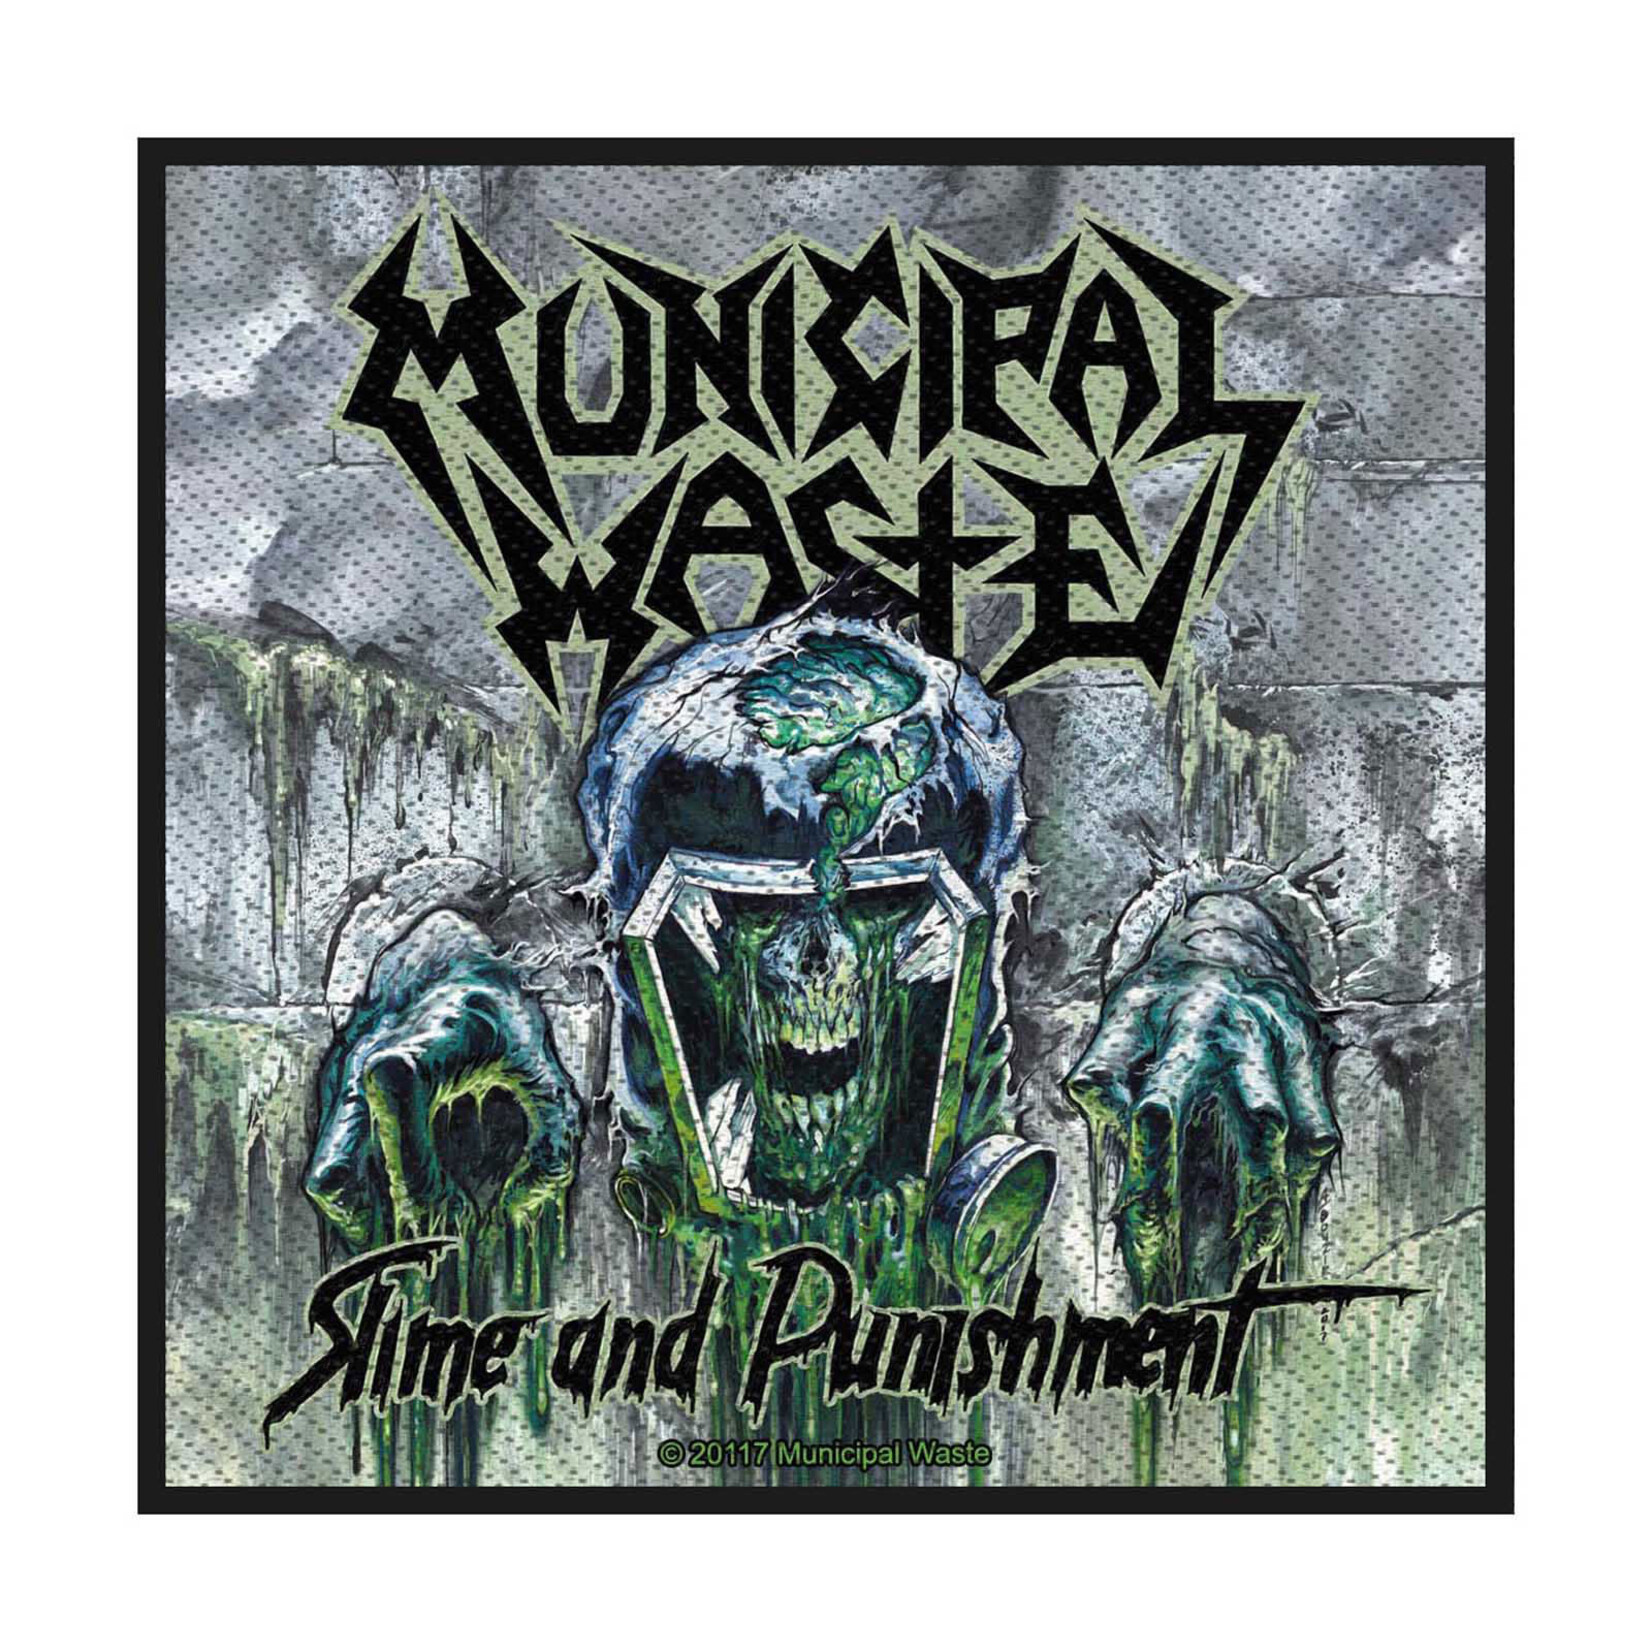 Patch - Municipal Waste: Waste Slime And Punishment